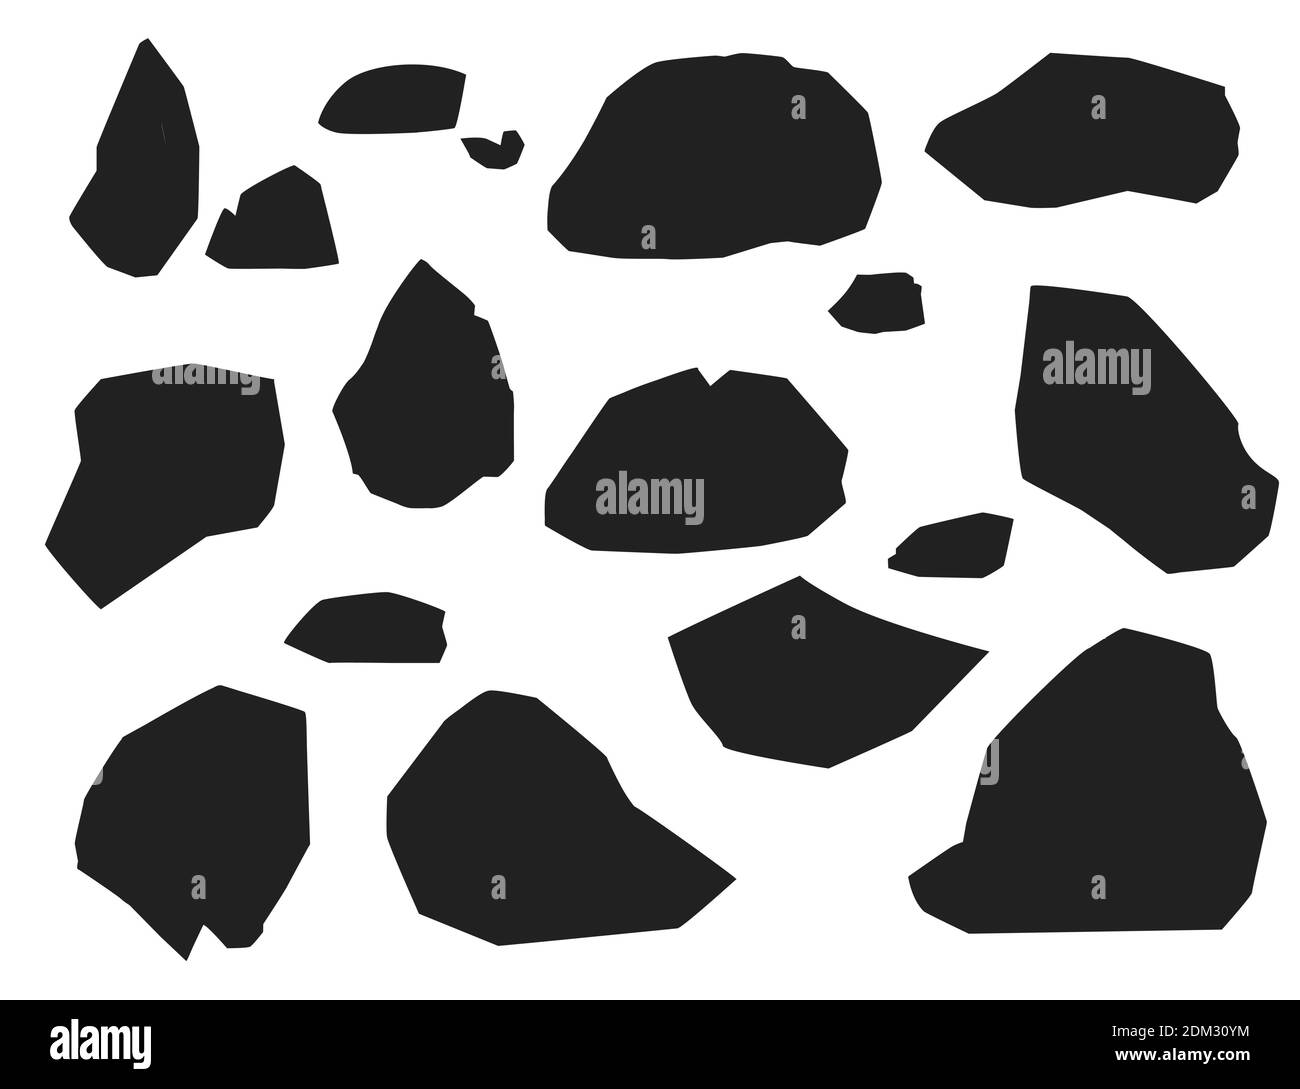 Black silhouette set of stones and rocks different sizes and shapes flat vector illustration isolated on white background Stock Vector